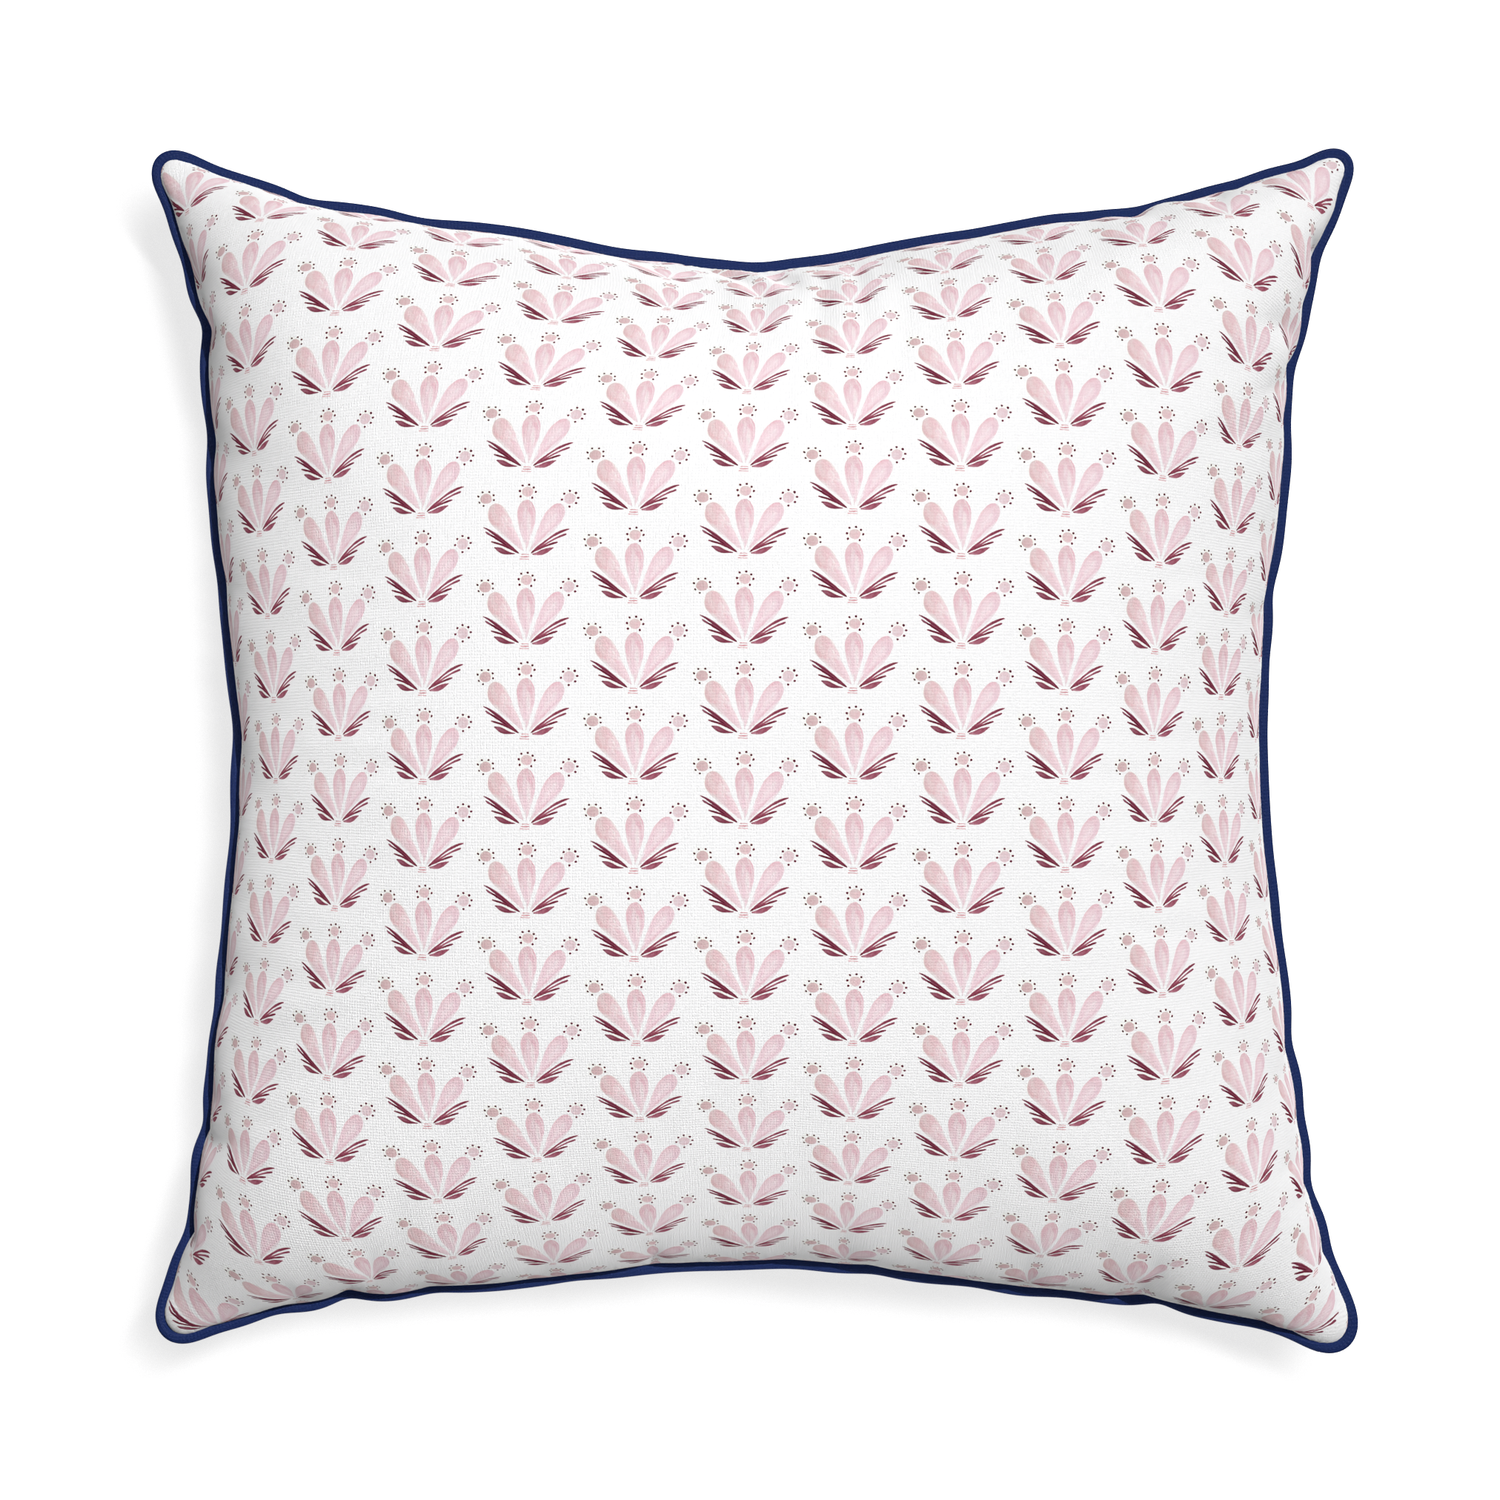 Euro-sham serena pink custom pink & burgundy drop repeat floralpillow with midnight piping on white background